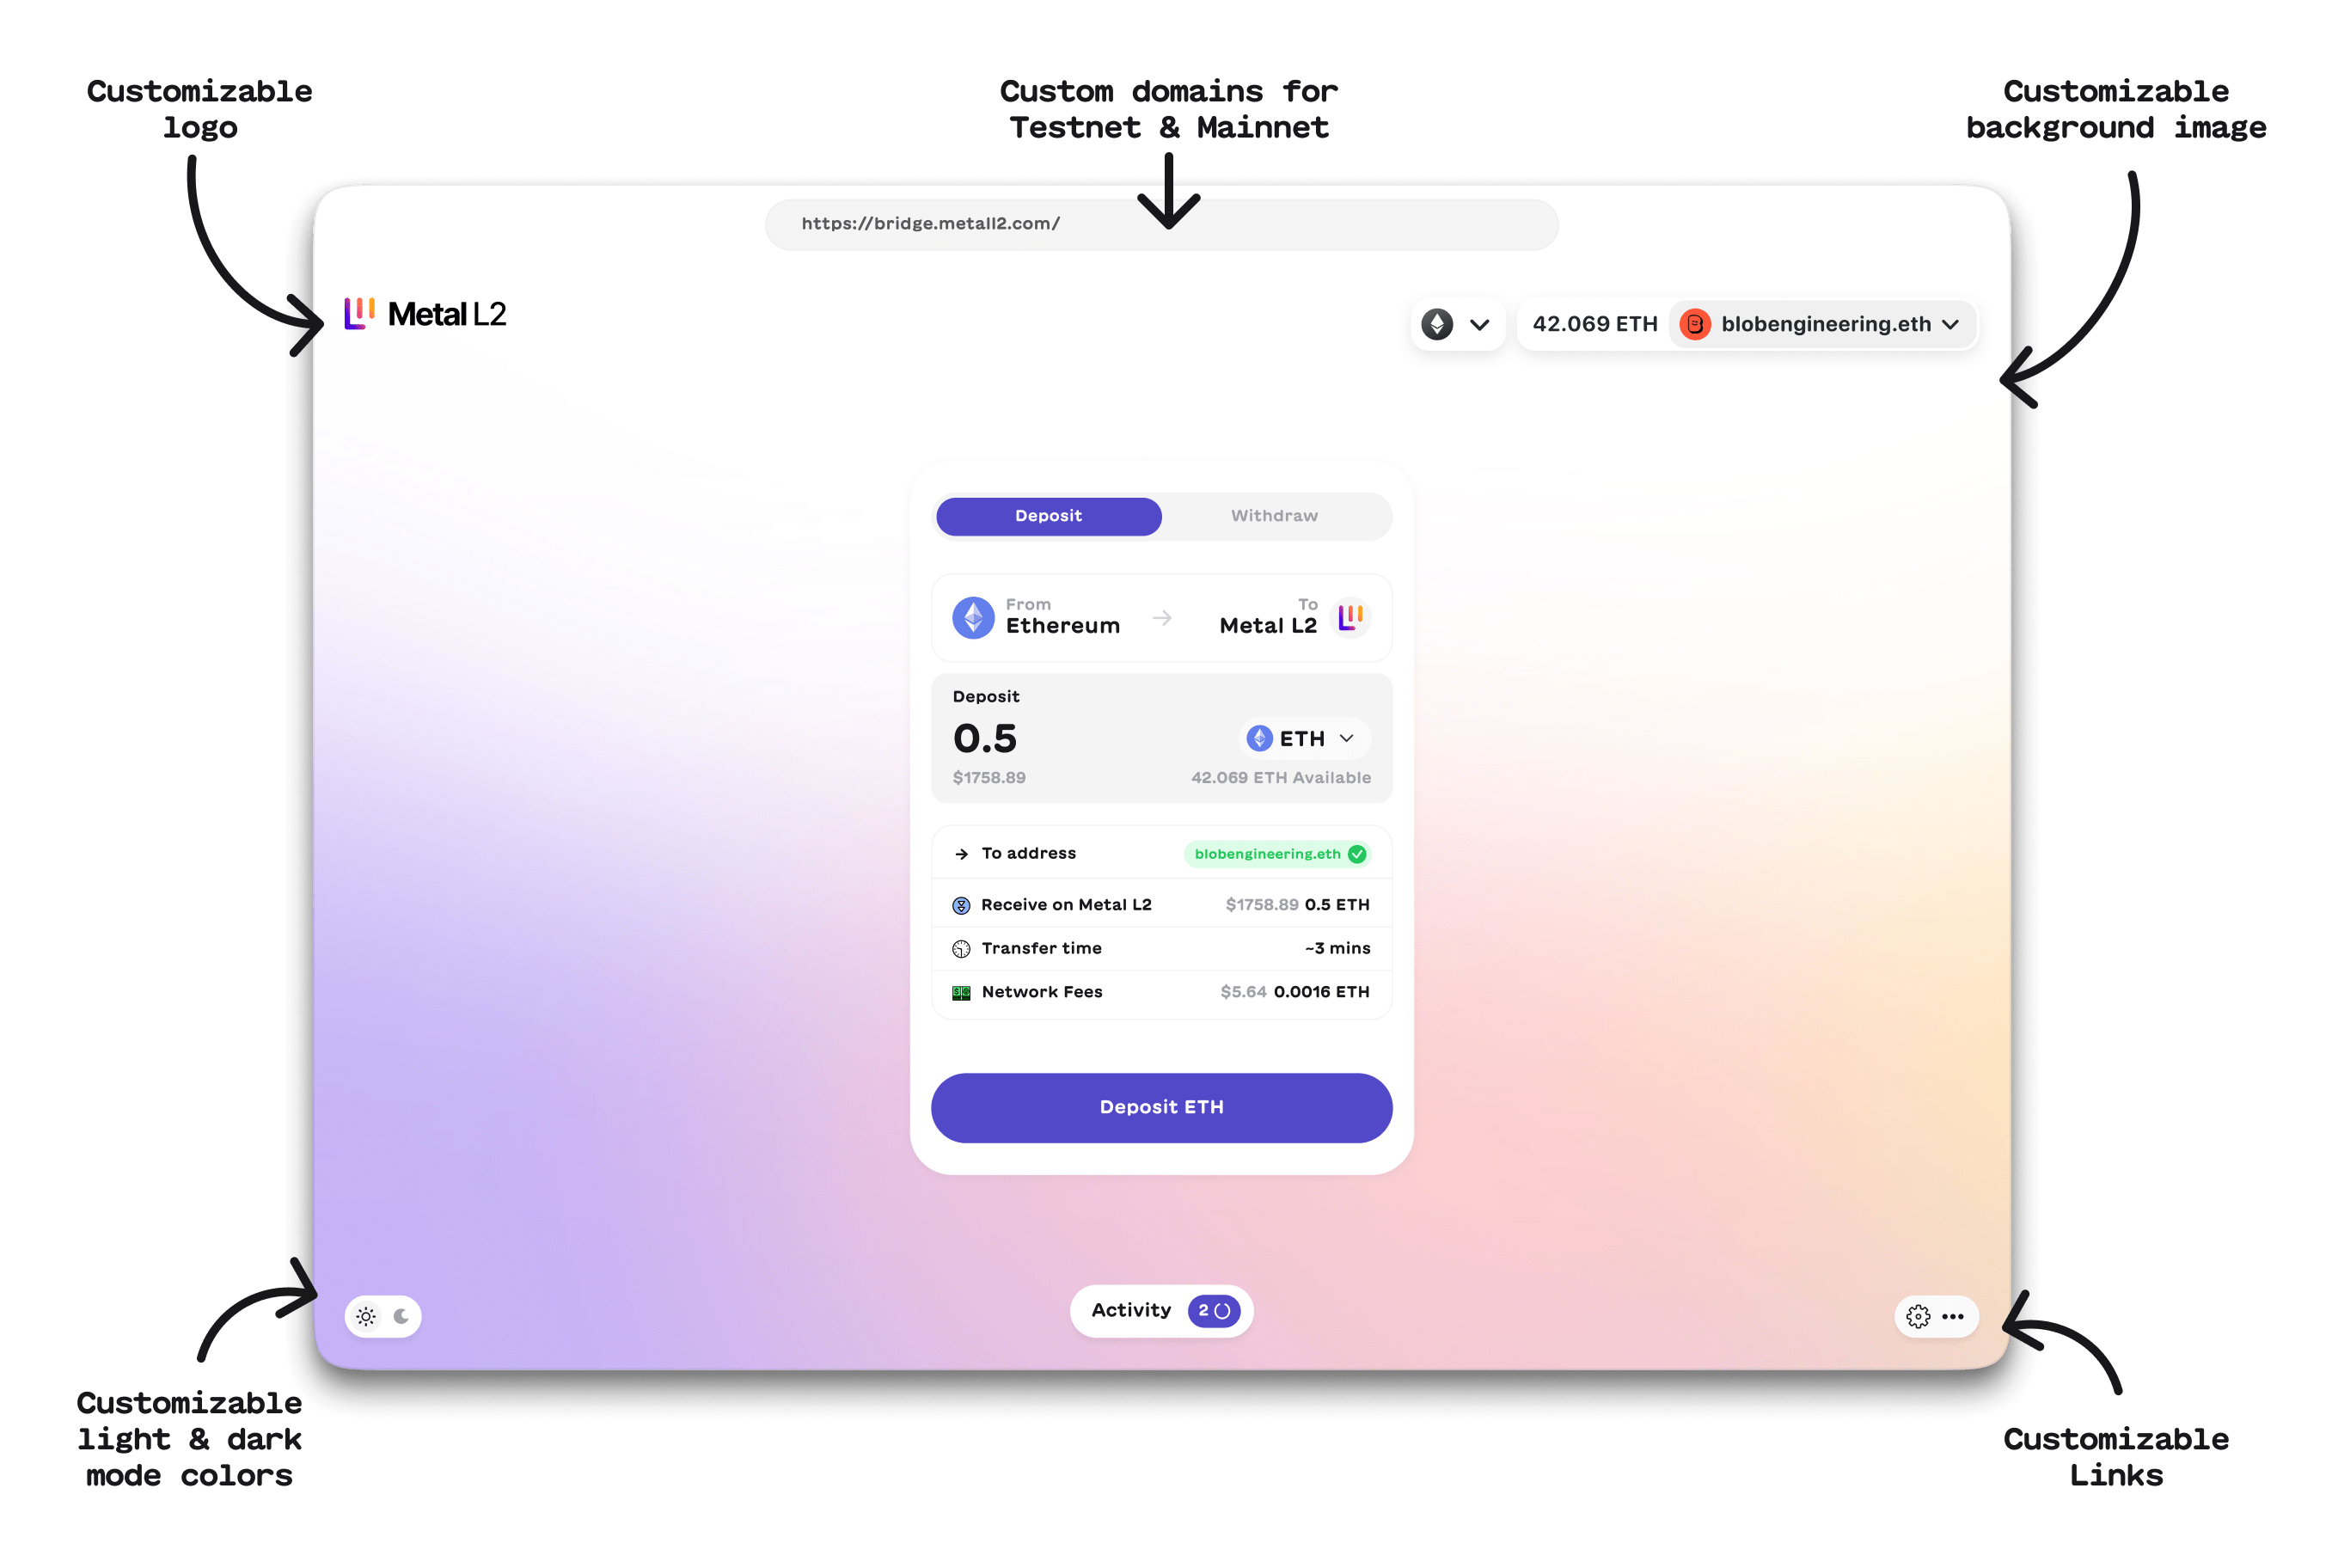 Customizable logo, customizable colors, customizable background image, and customizable links along with custom domains for testnet and mainnet